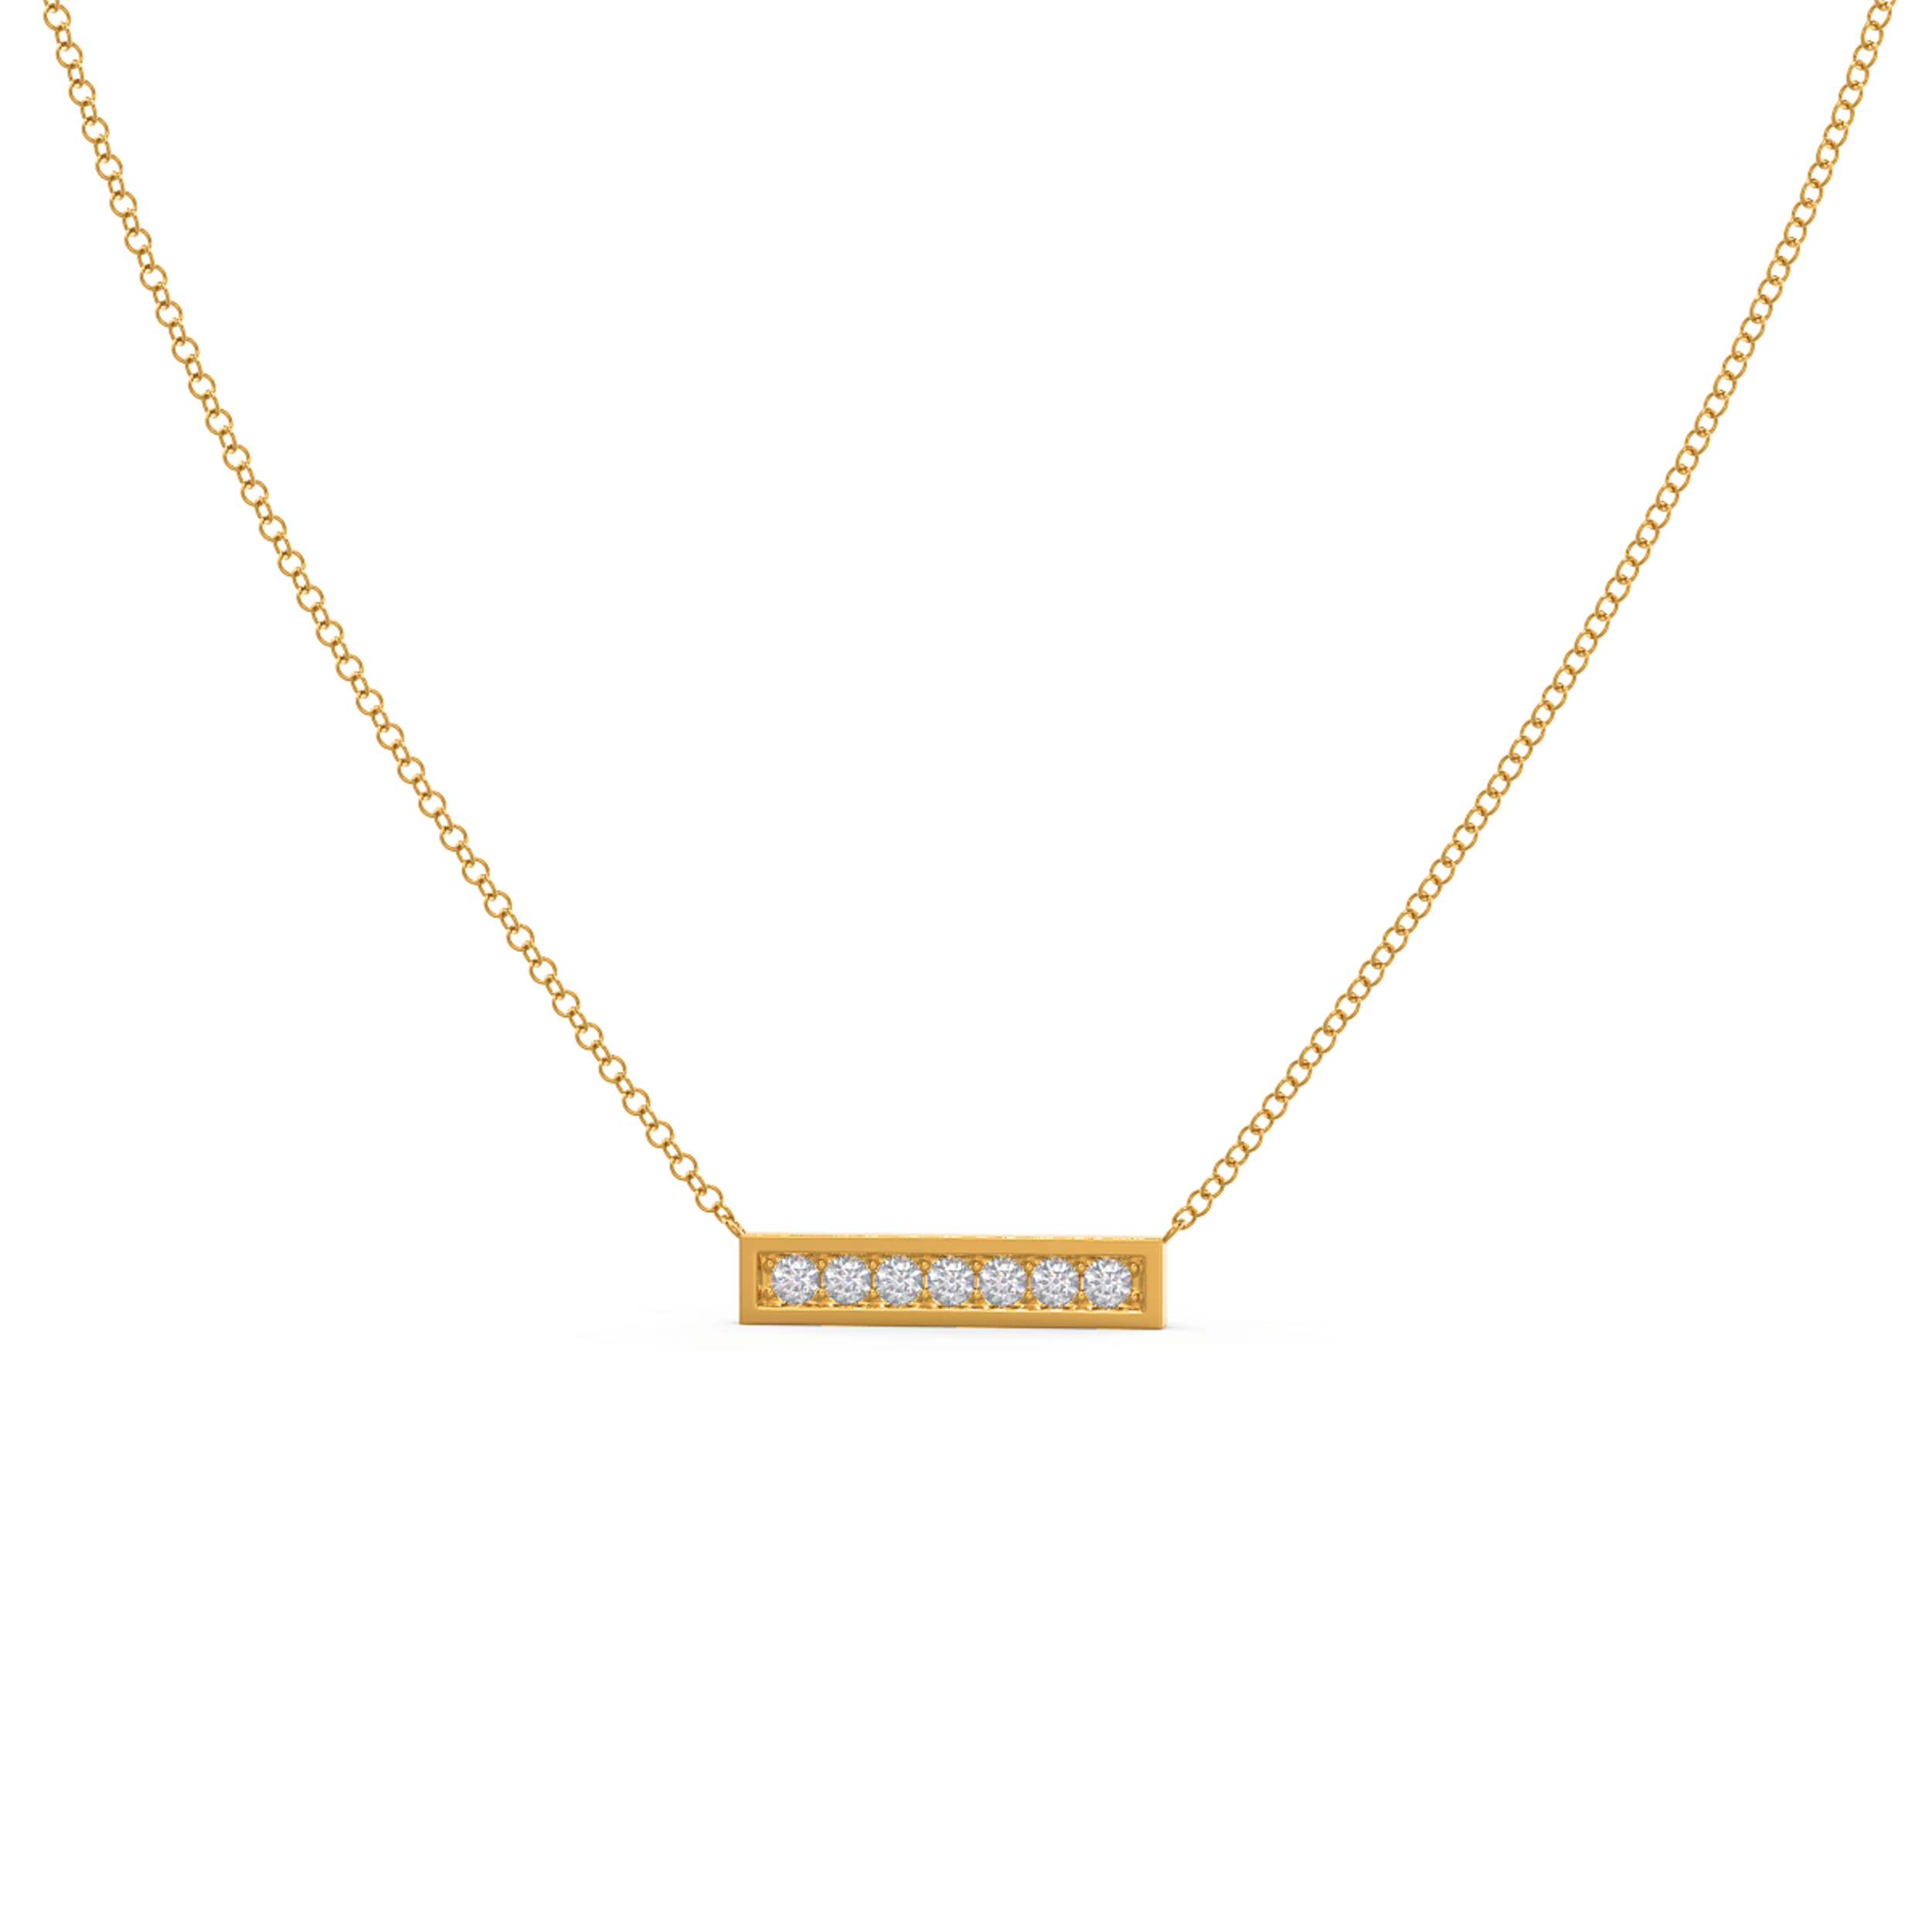 yellow gold necklace featuring man made diamonds